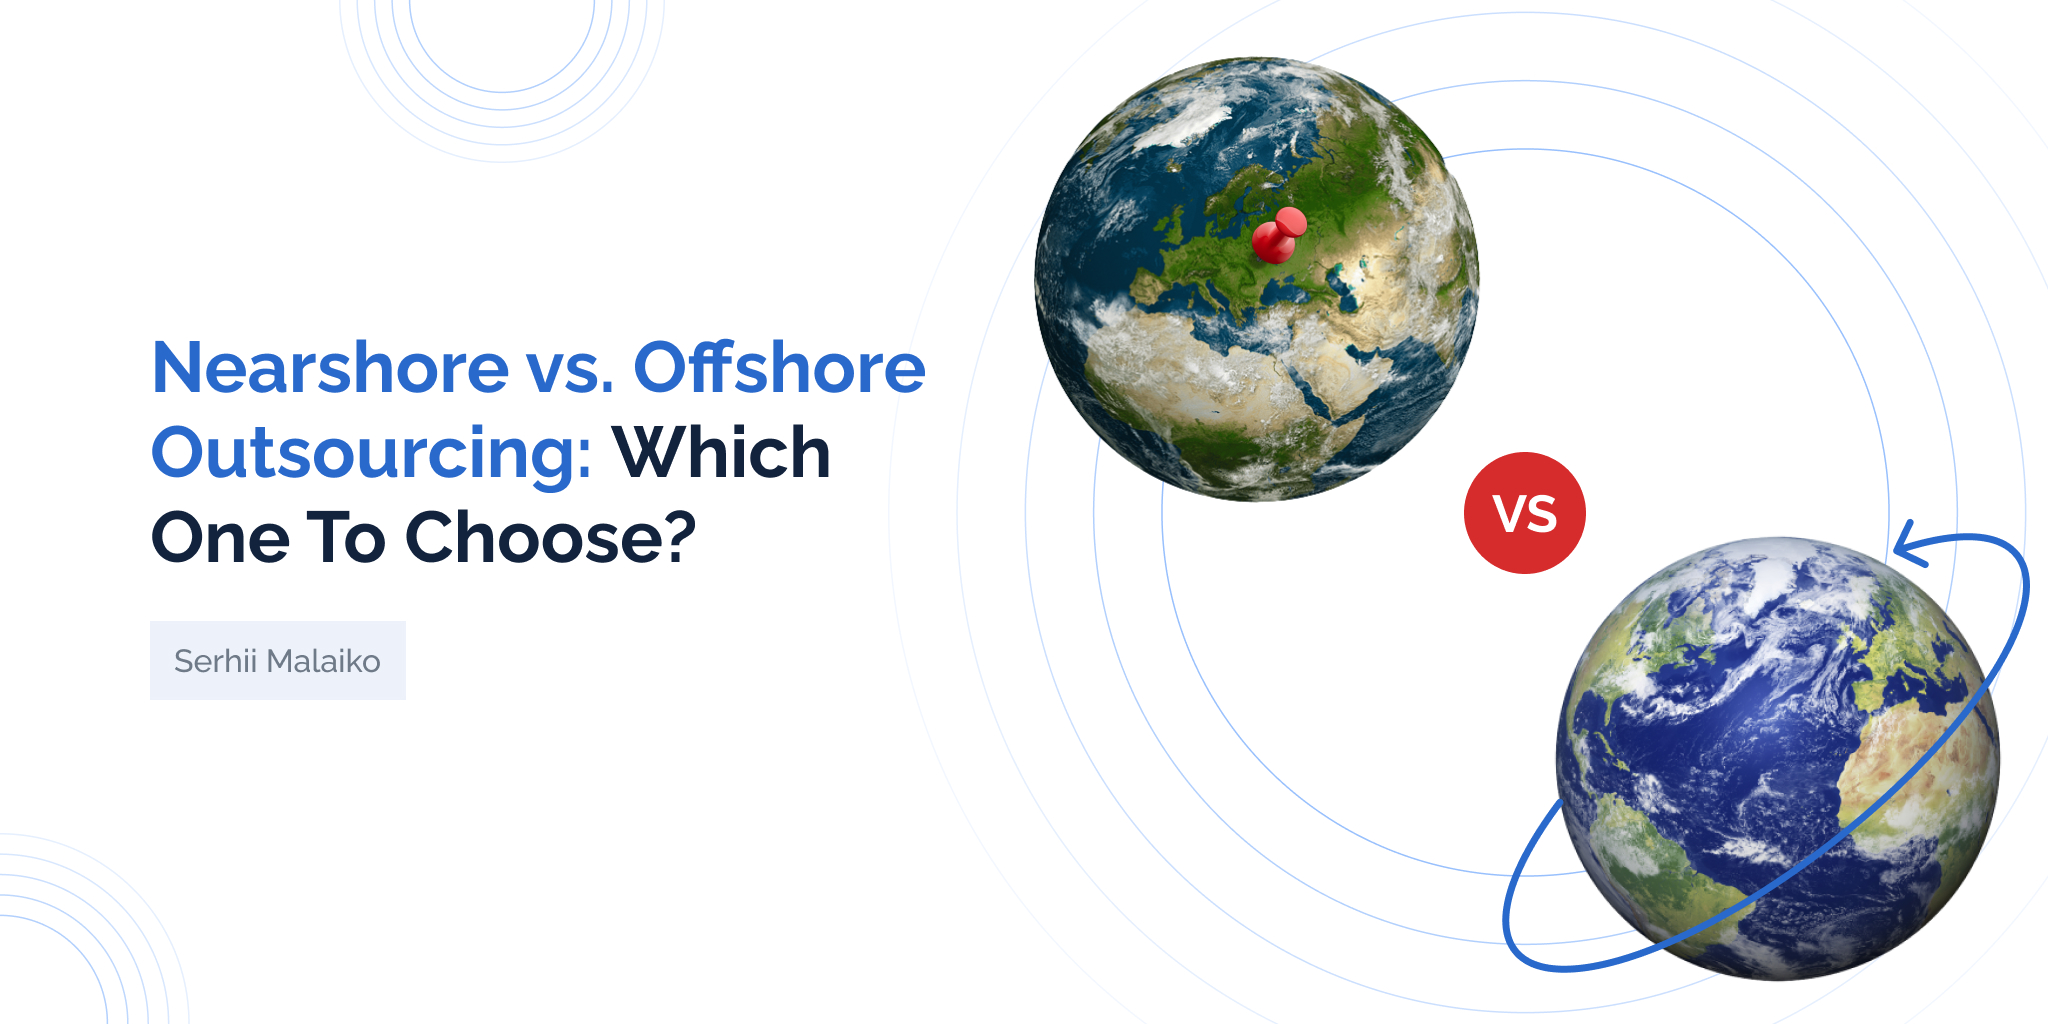 Nearshore vs. Offshore Outsourcing: Which One To Choose?